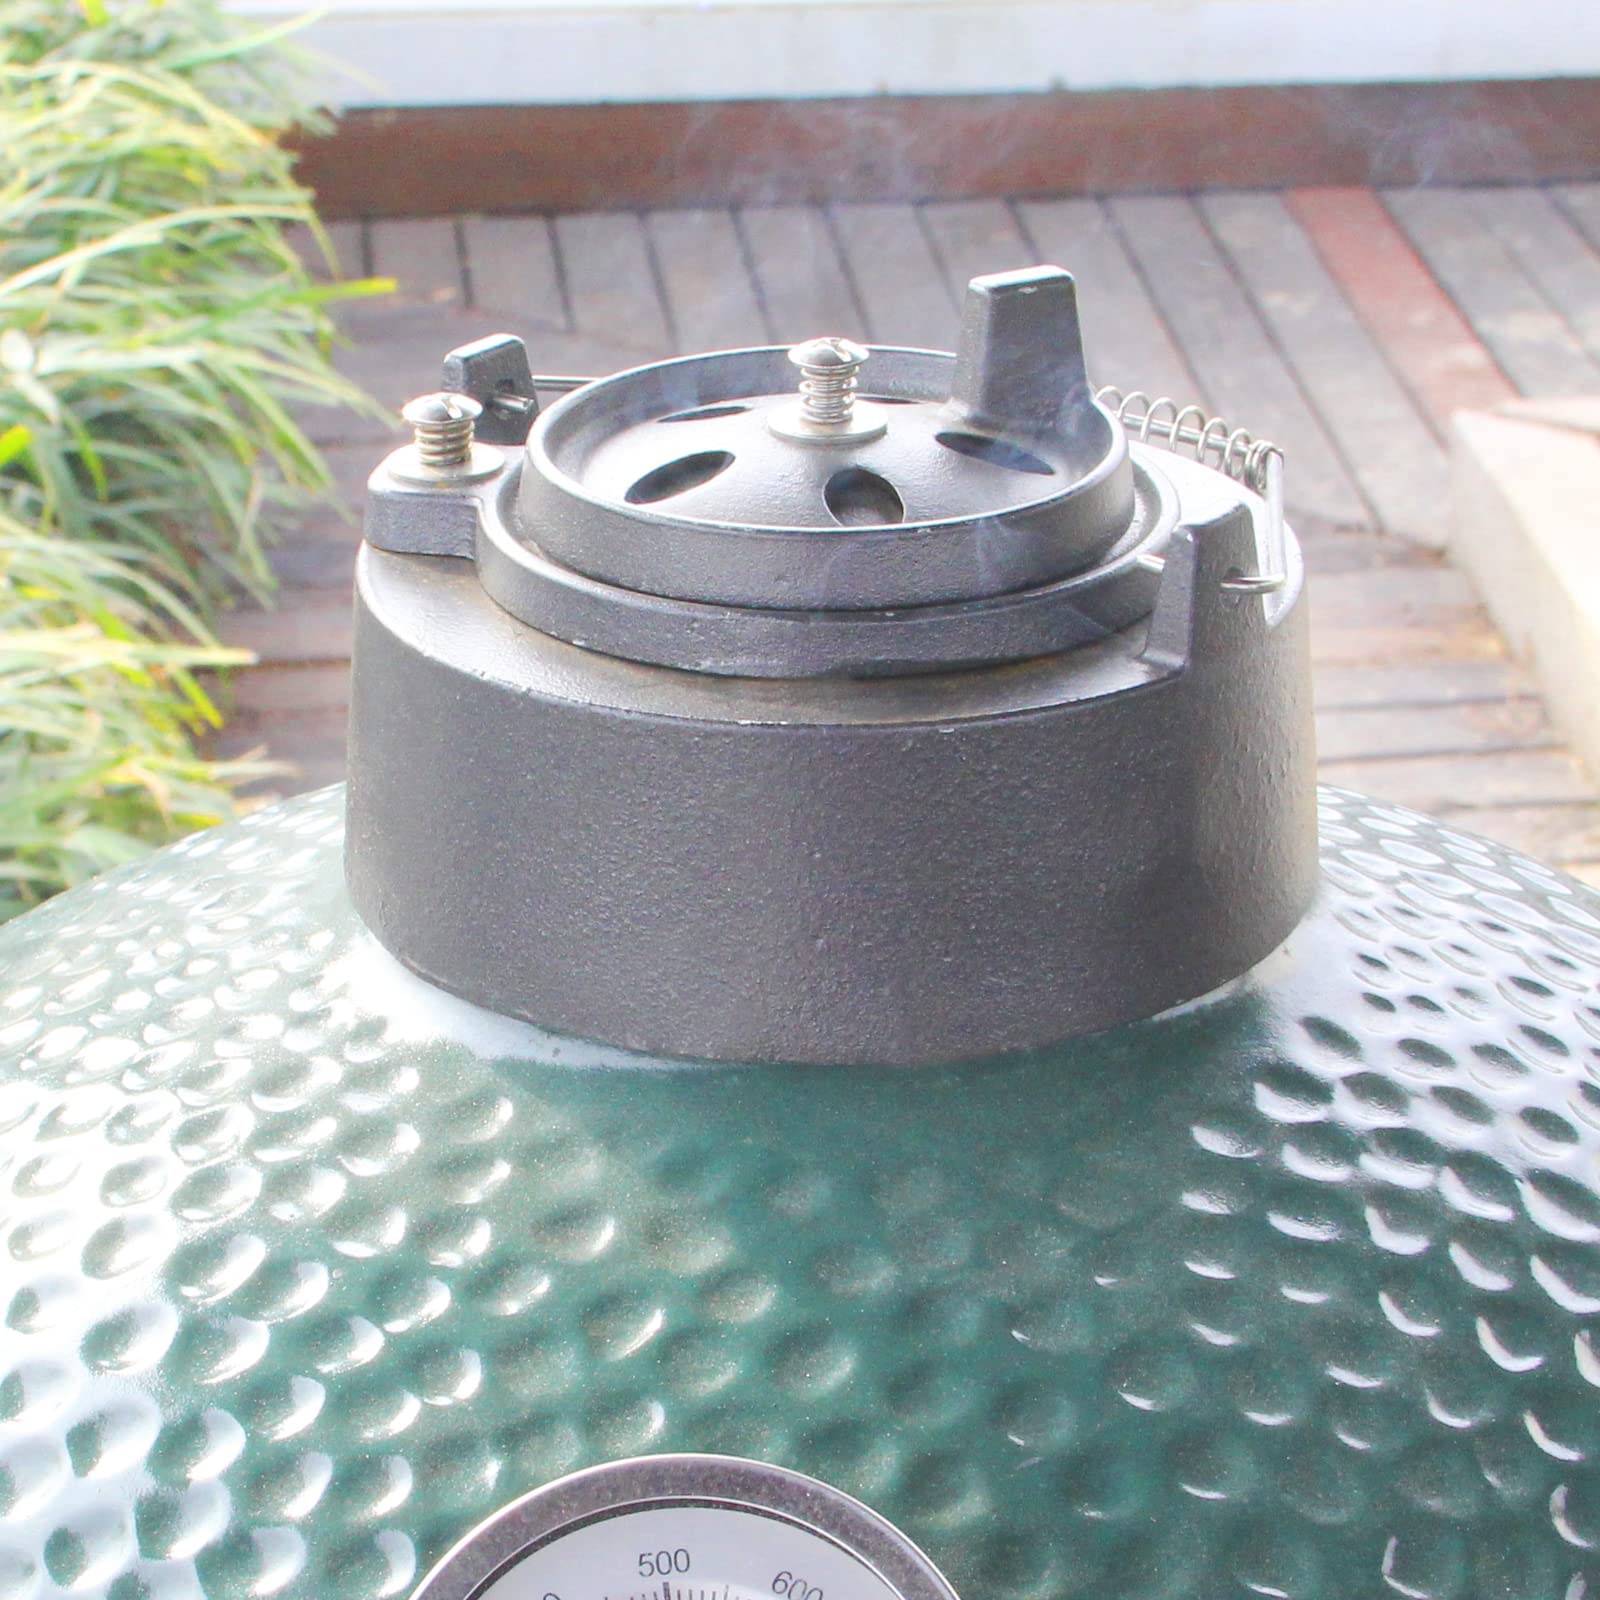 Cast Iron Damper Chimney Cap for Big Green Egg, Big Green Egg Accessories Daisy Wheel for Large&Medium Big Green Egg Damper Cap Big Green Egg Accessories Vented Cap Big Green Egg Replacement Parts